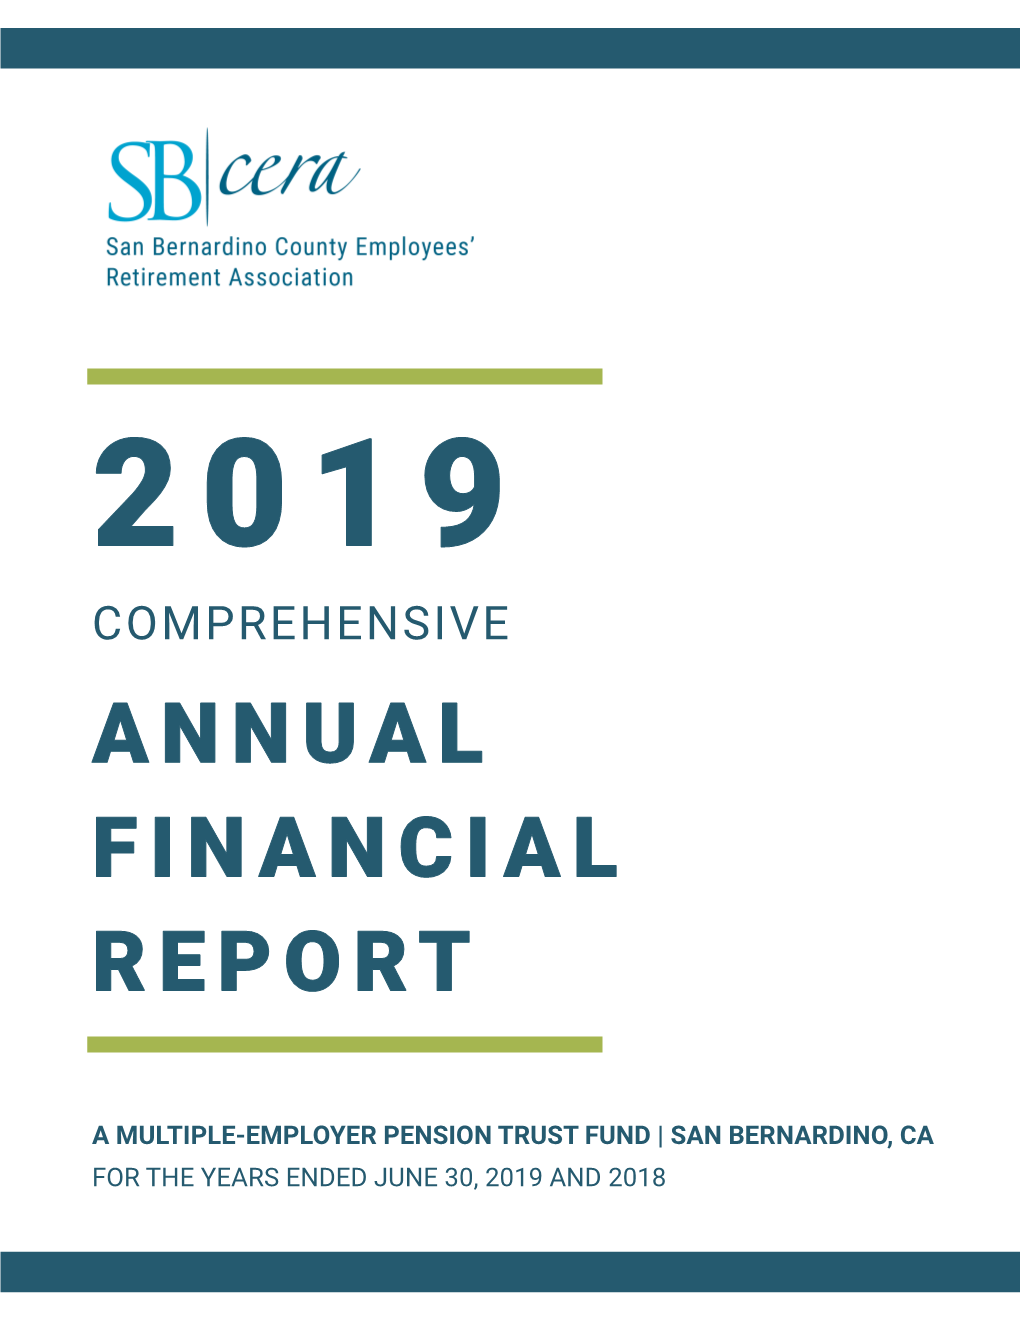 Comprehensive Annual Financial Report (CAFR) 2019